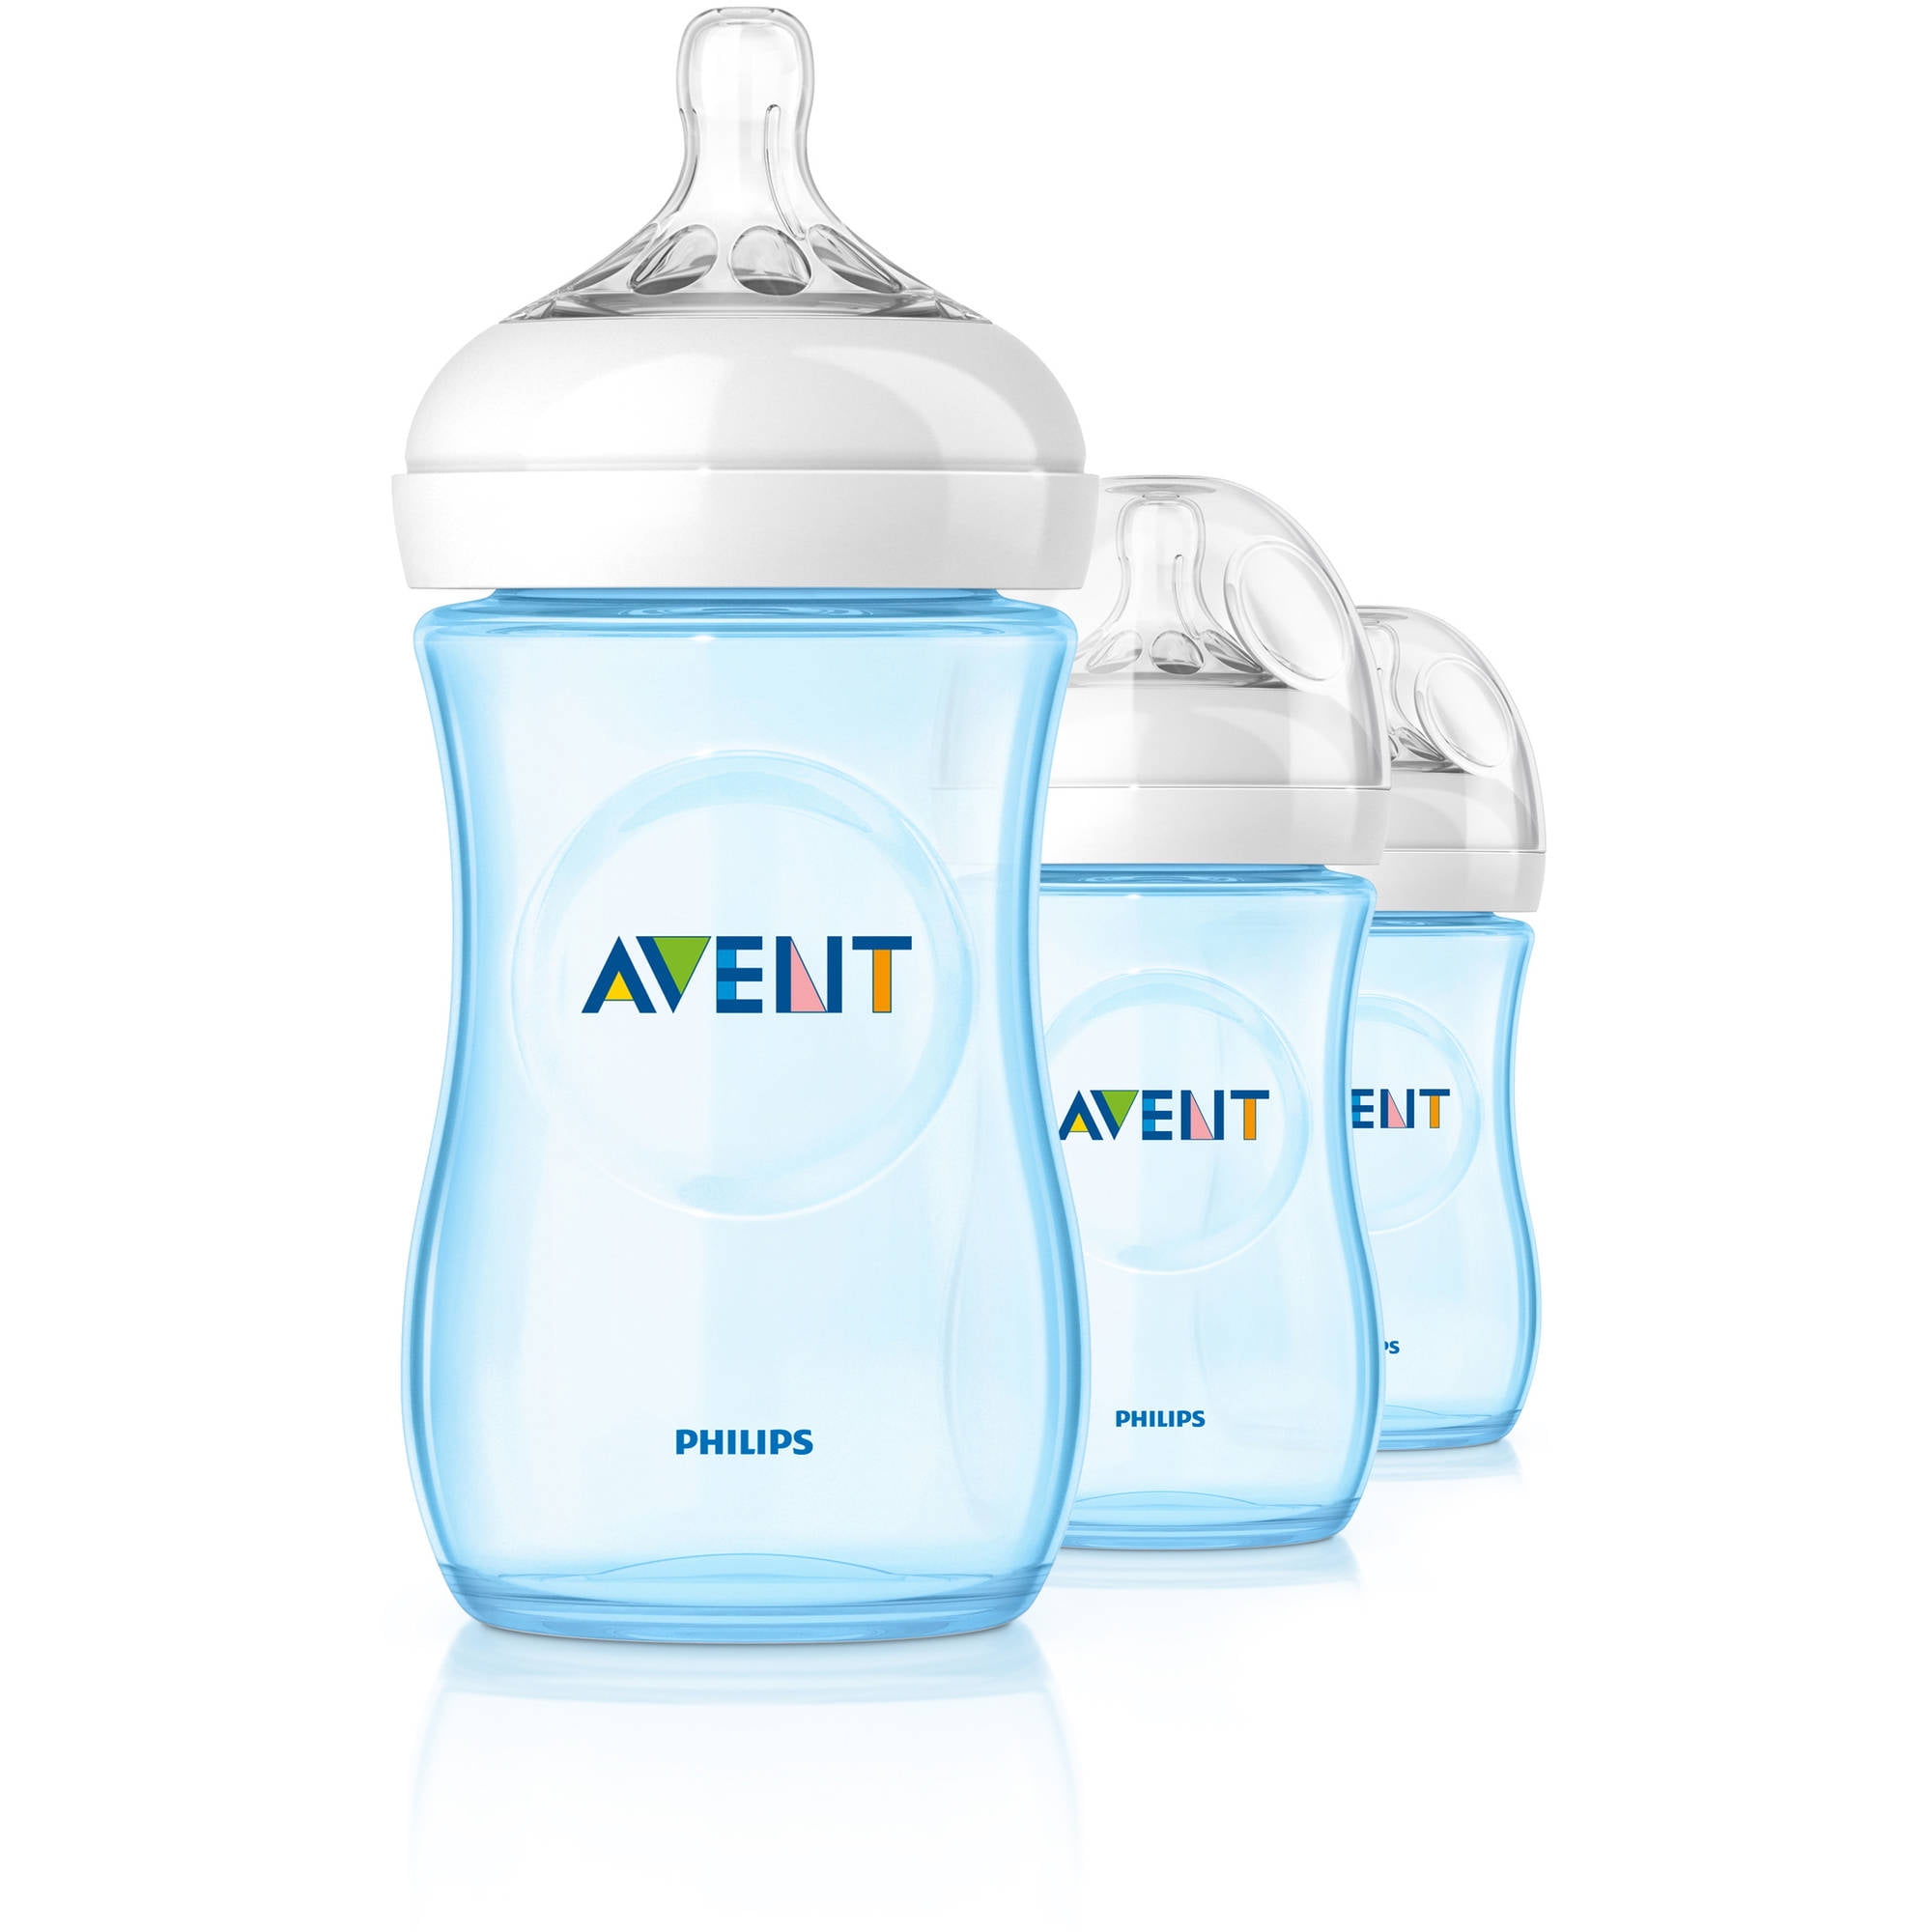 9 Oz Colors Vary Philips Avent Bottle BPA Free Pack of 2 3 Wide Neck Bottles